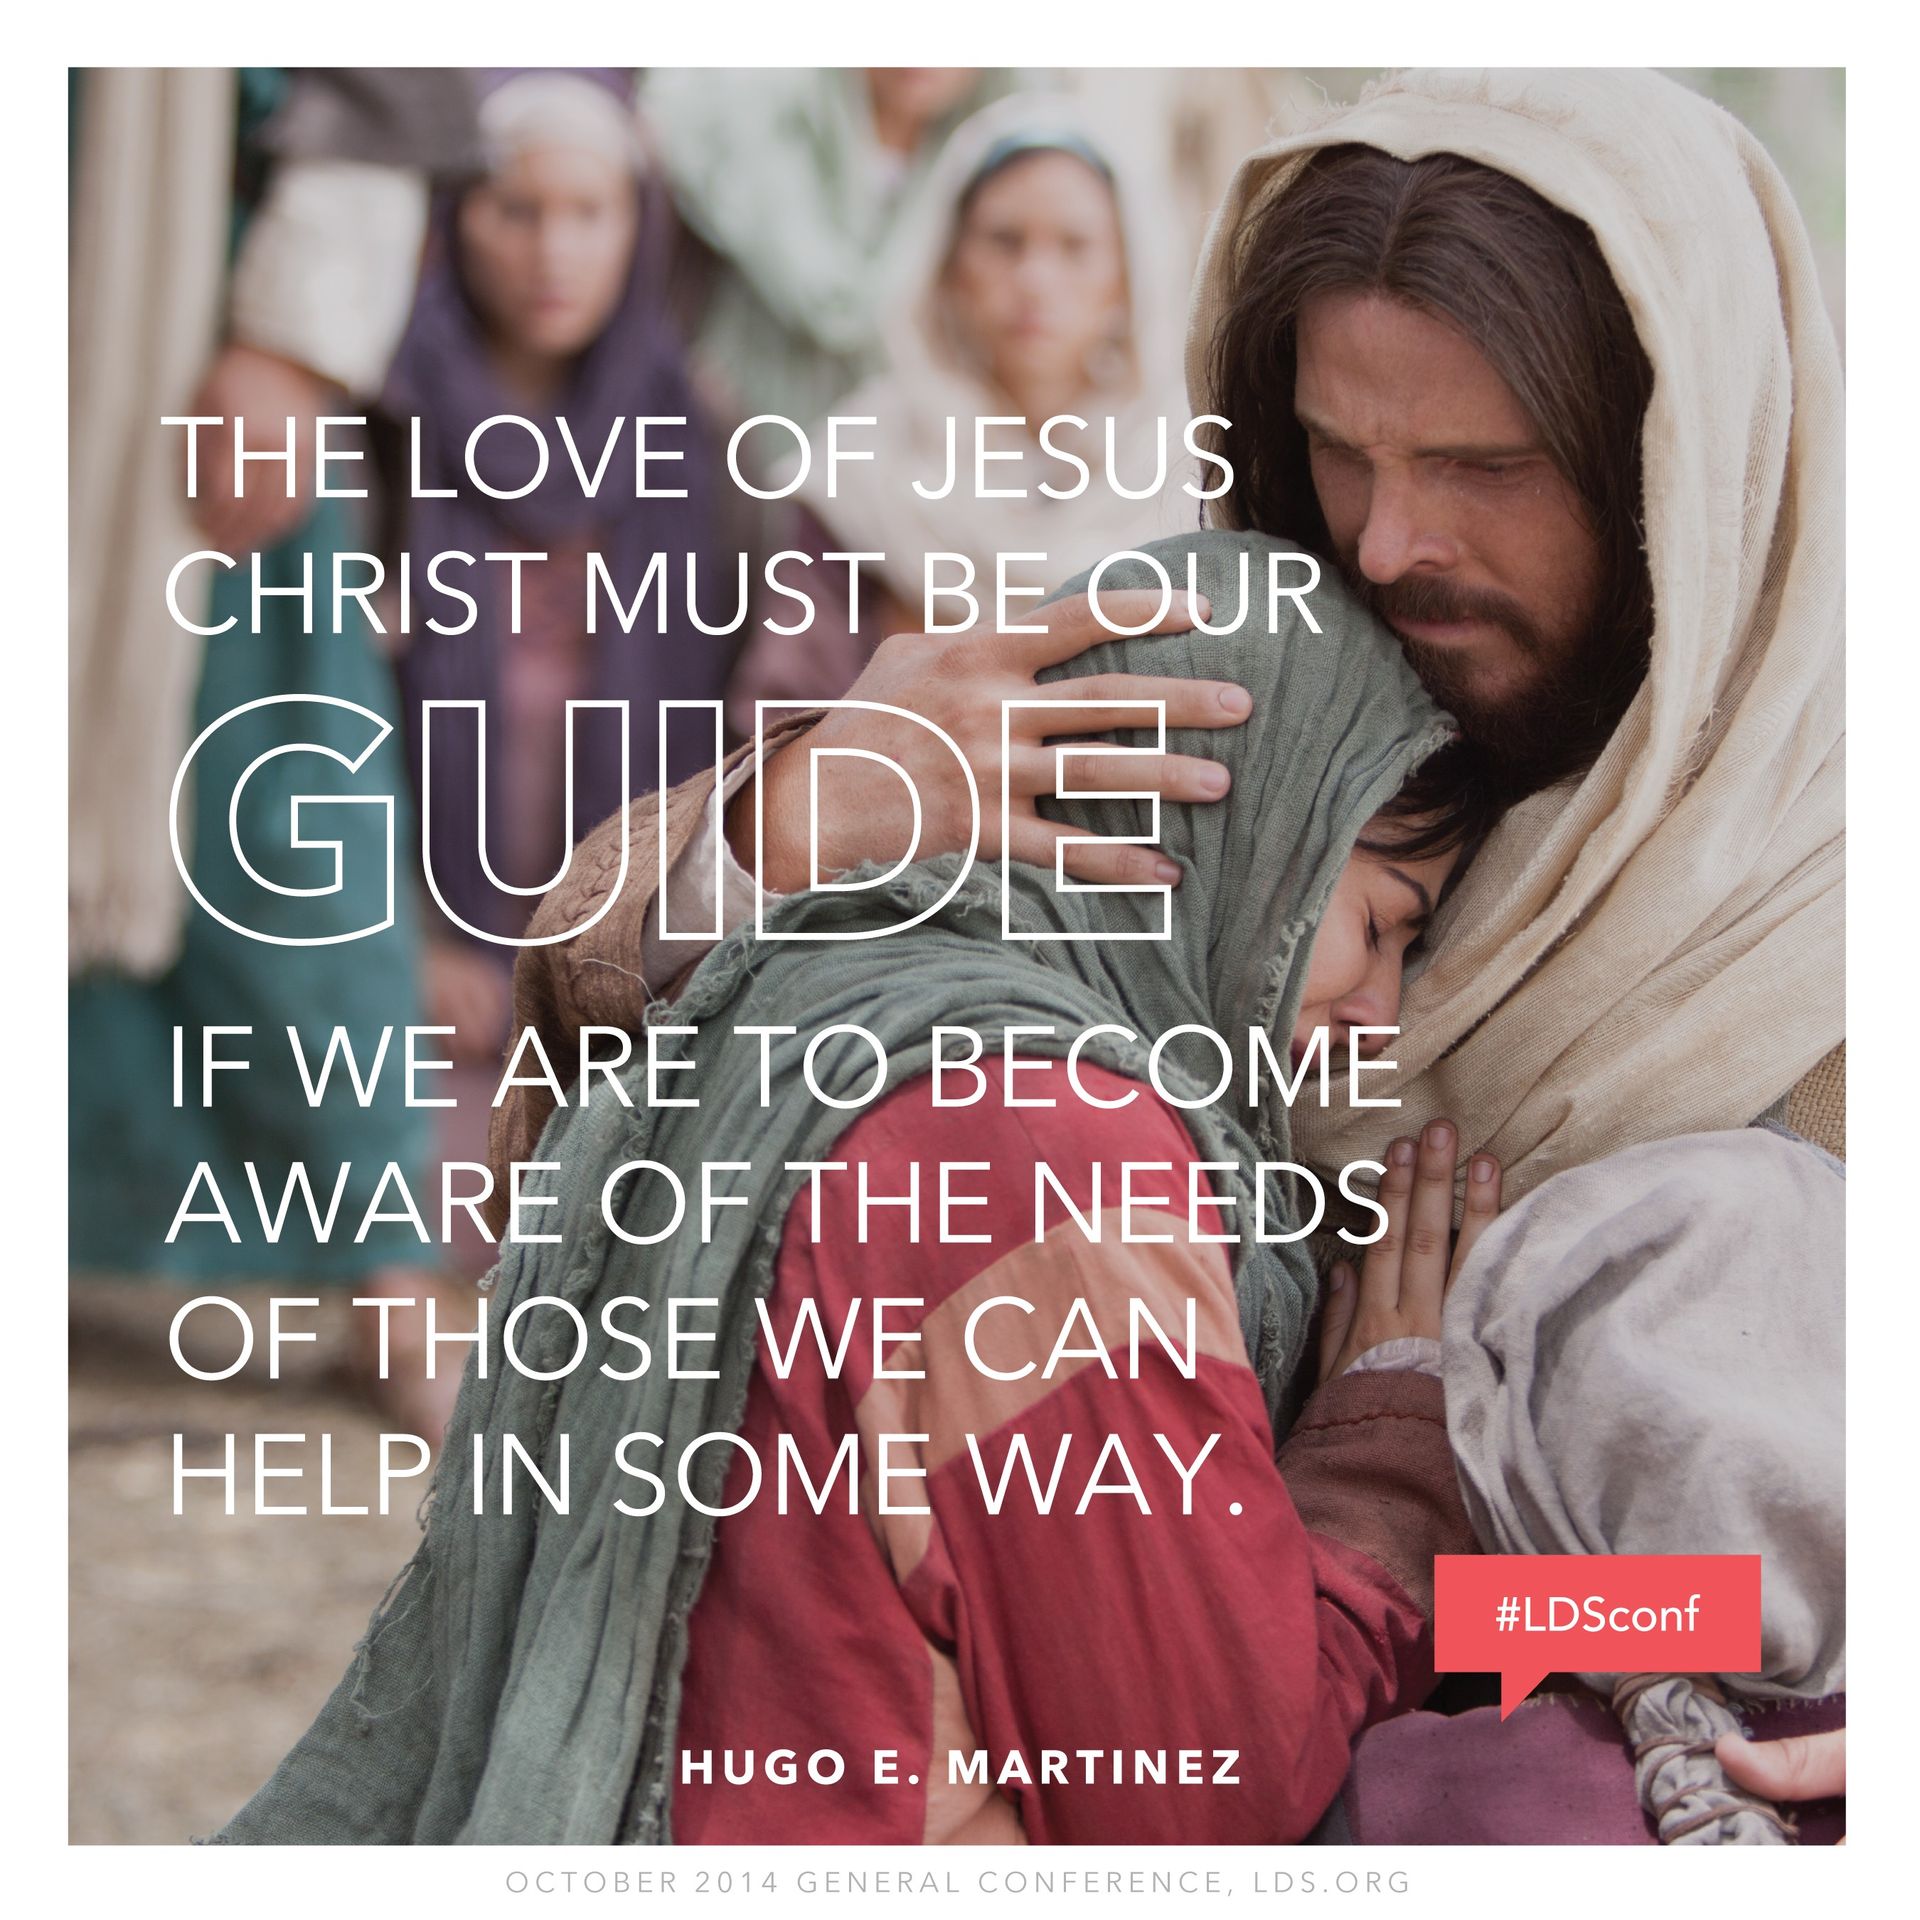 “The love of Jesus Christ must be our guide if we are to become aware of the needs of those we can help in some way.”—Elder Hugo E. Martinez, “Our Personal Ministries” © undefined ipCode 1.